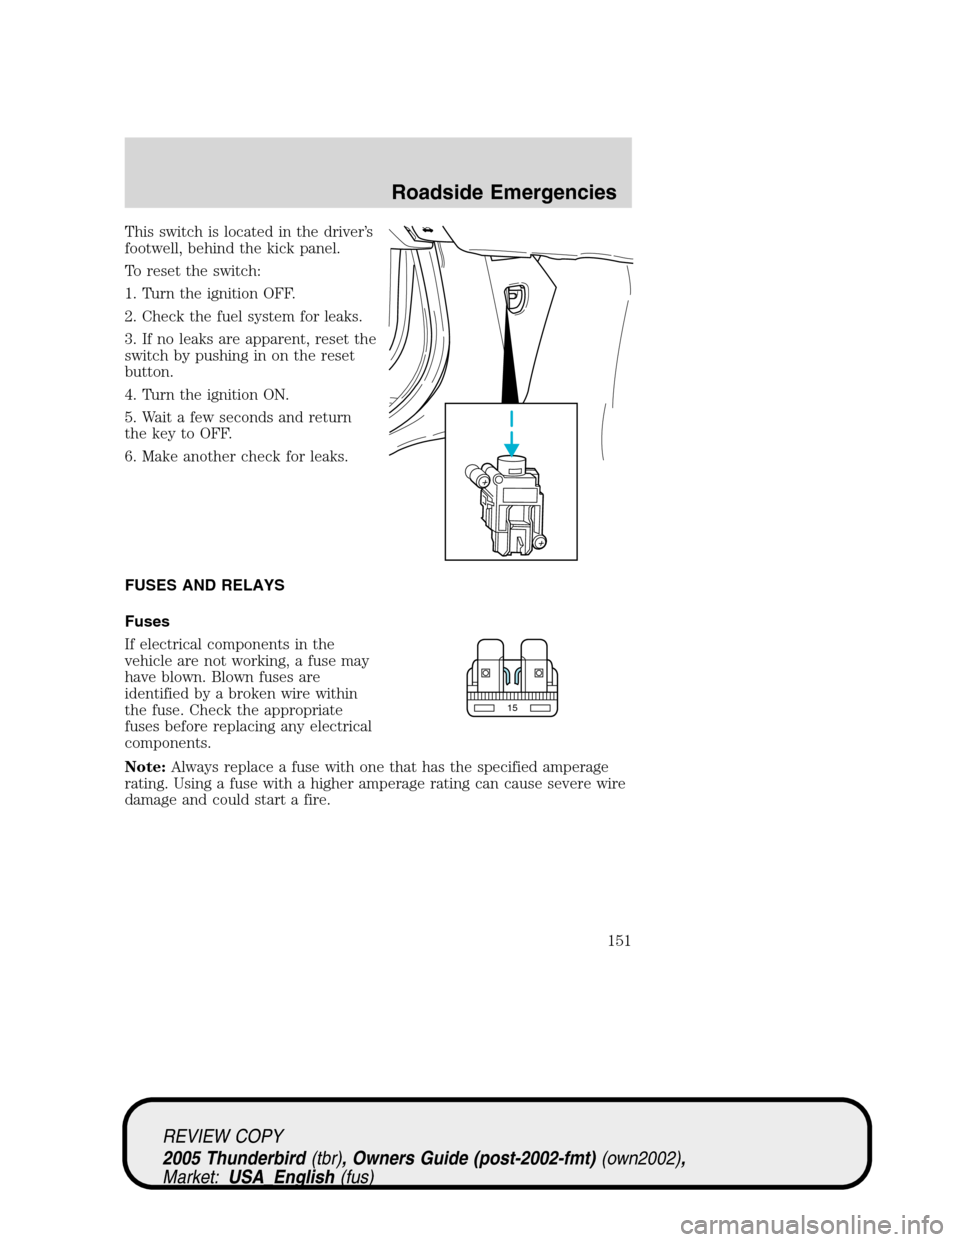 FORD THUNDERBIRD 2005 11.G Owners Manual This switch is located in the driver’s
footwell, behind the kick panel.
To reset the switch:
1. Turn the ignition OFF.
2. Check the fuel system for leaks.
3. If no leaks are apparent, reset the
swit